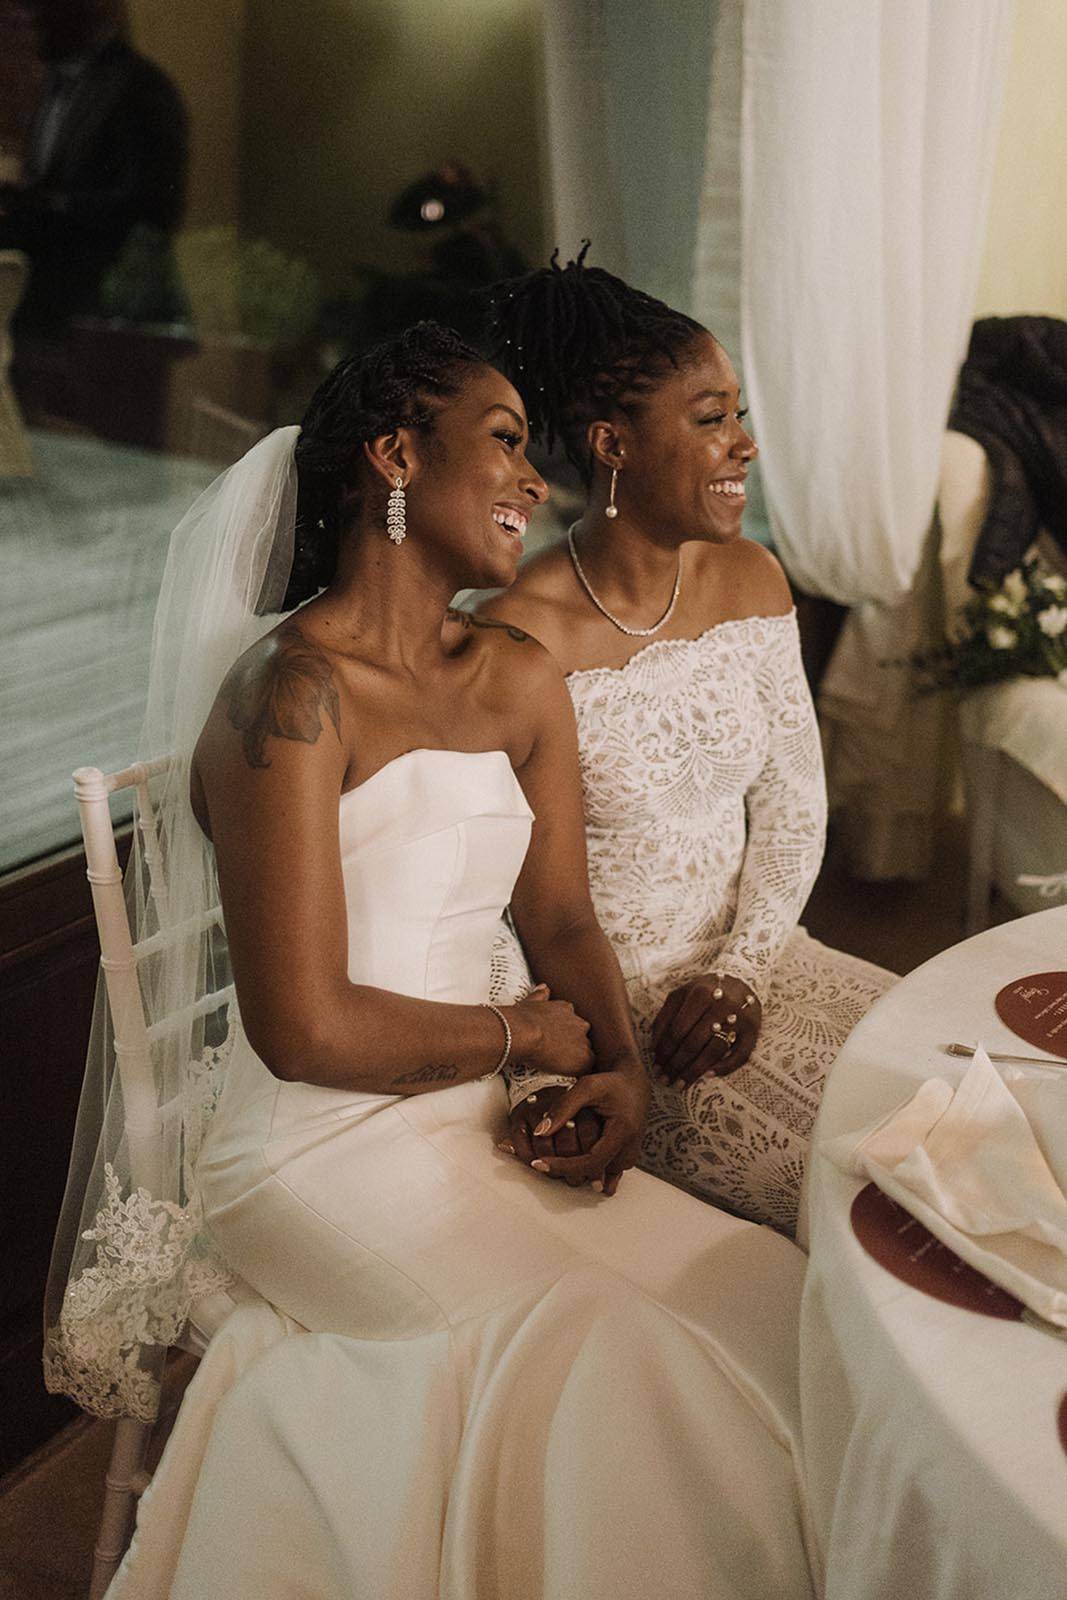 Two brides, beautifully adorned in white wedding gowns, sharing an intimate moment as they sit side by side